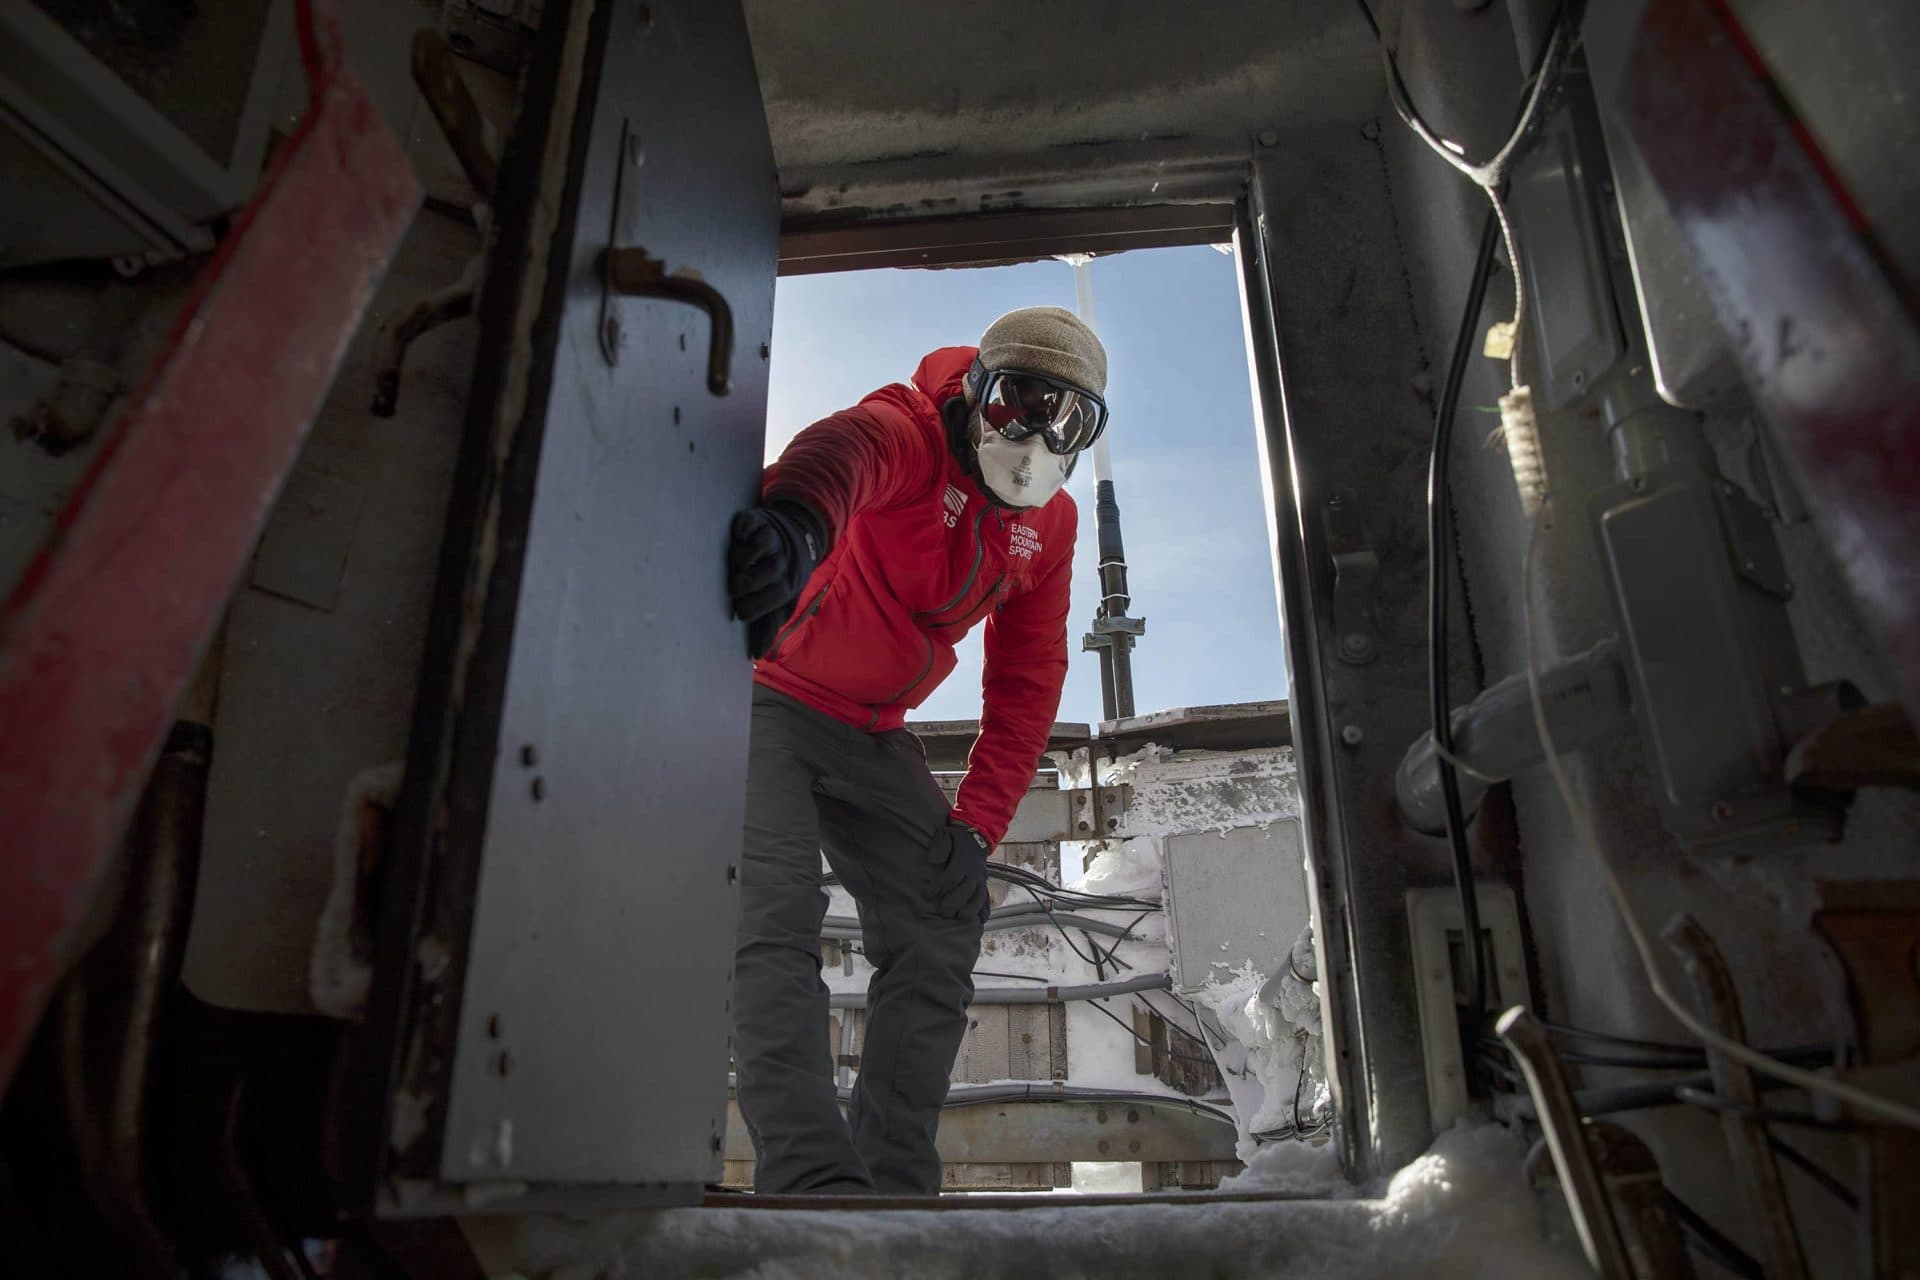 Science and education director Brian Fitzgerald holds open the door at the top of the weather tower at the Mount Washington Observatory. (Robin Lubbock/WBUR)